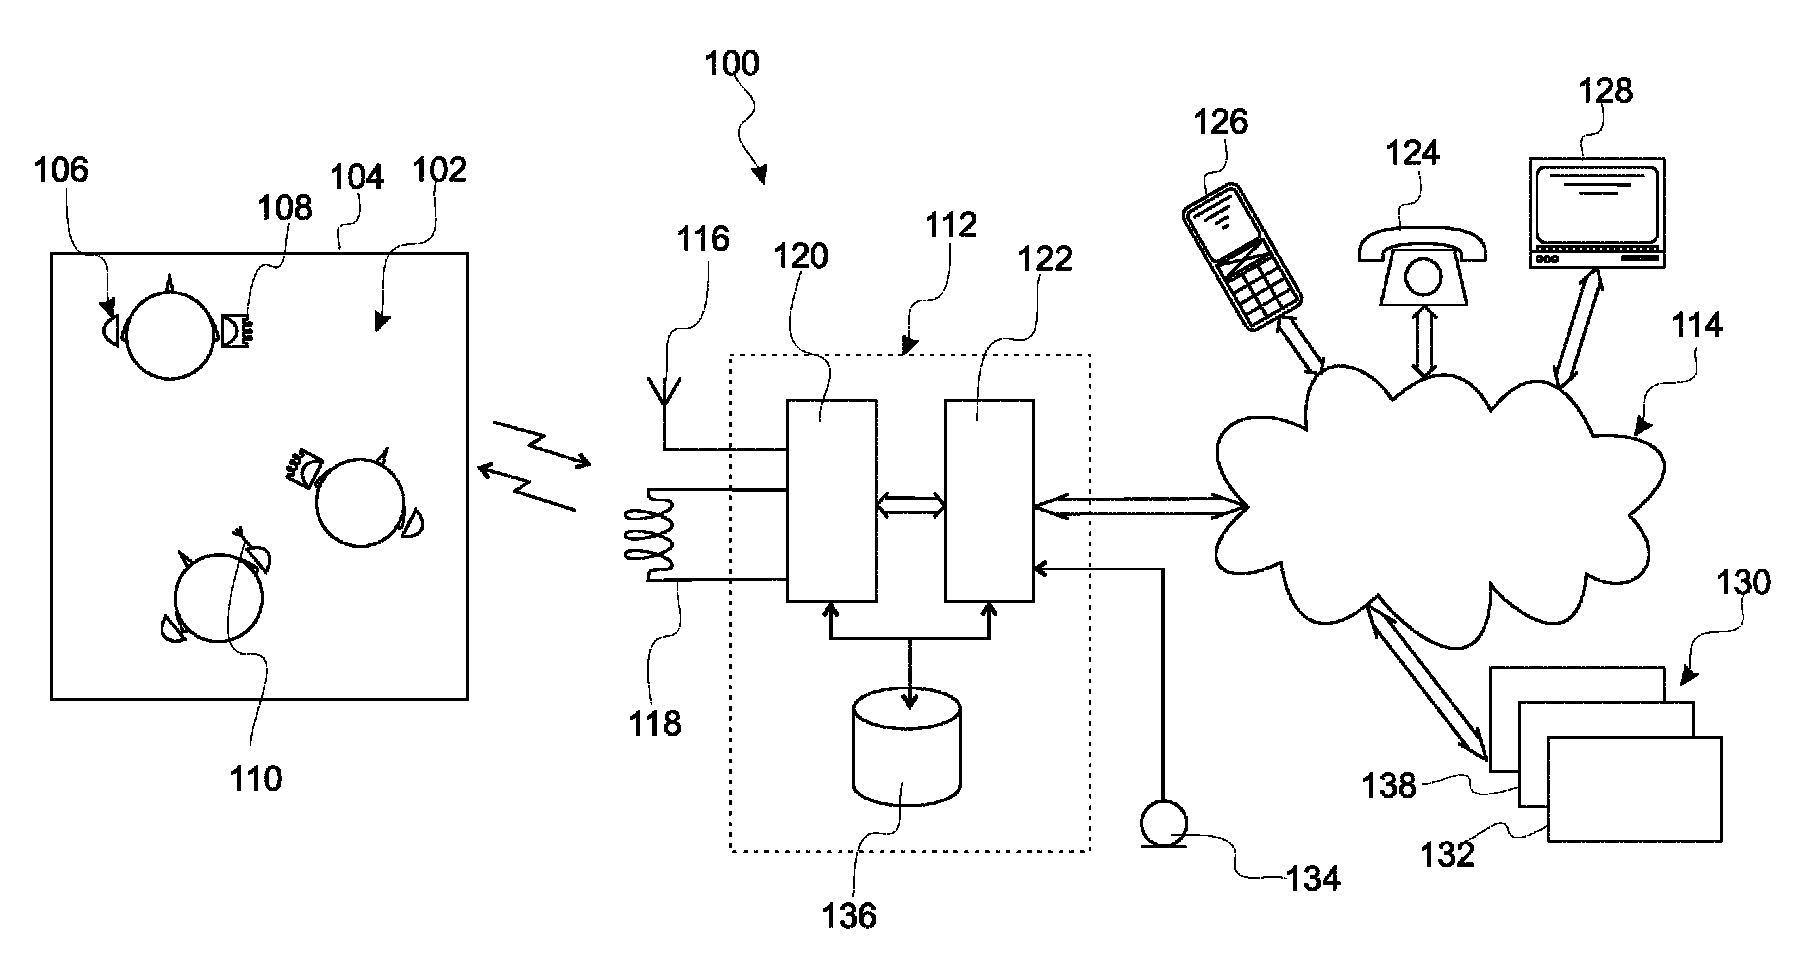 System and method for sharing network resources between hearing devices